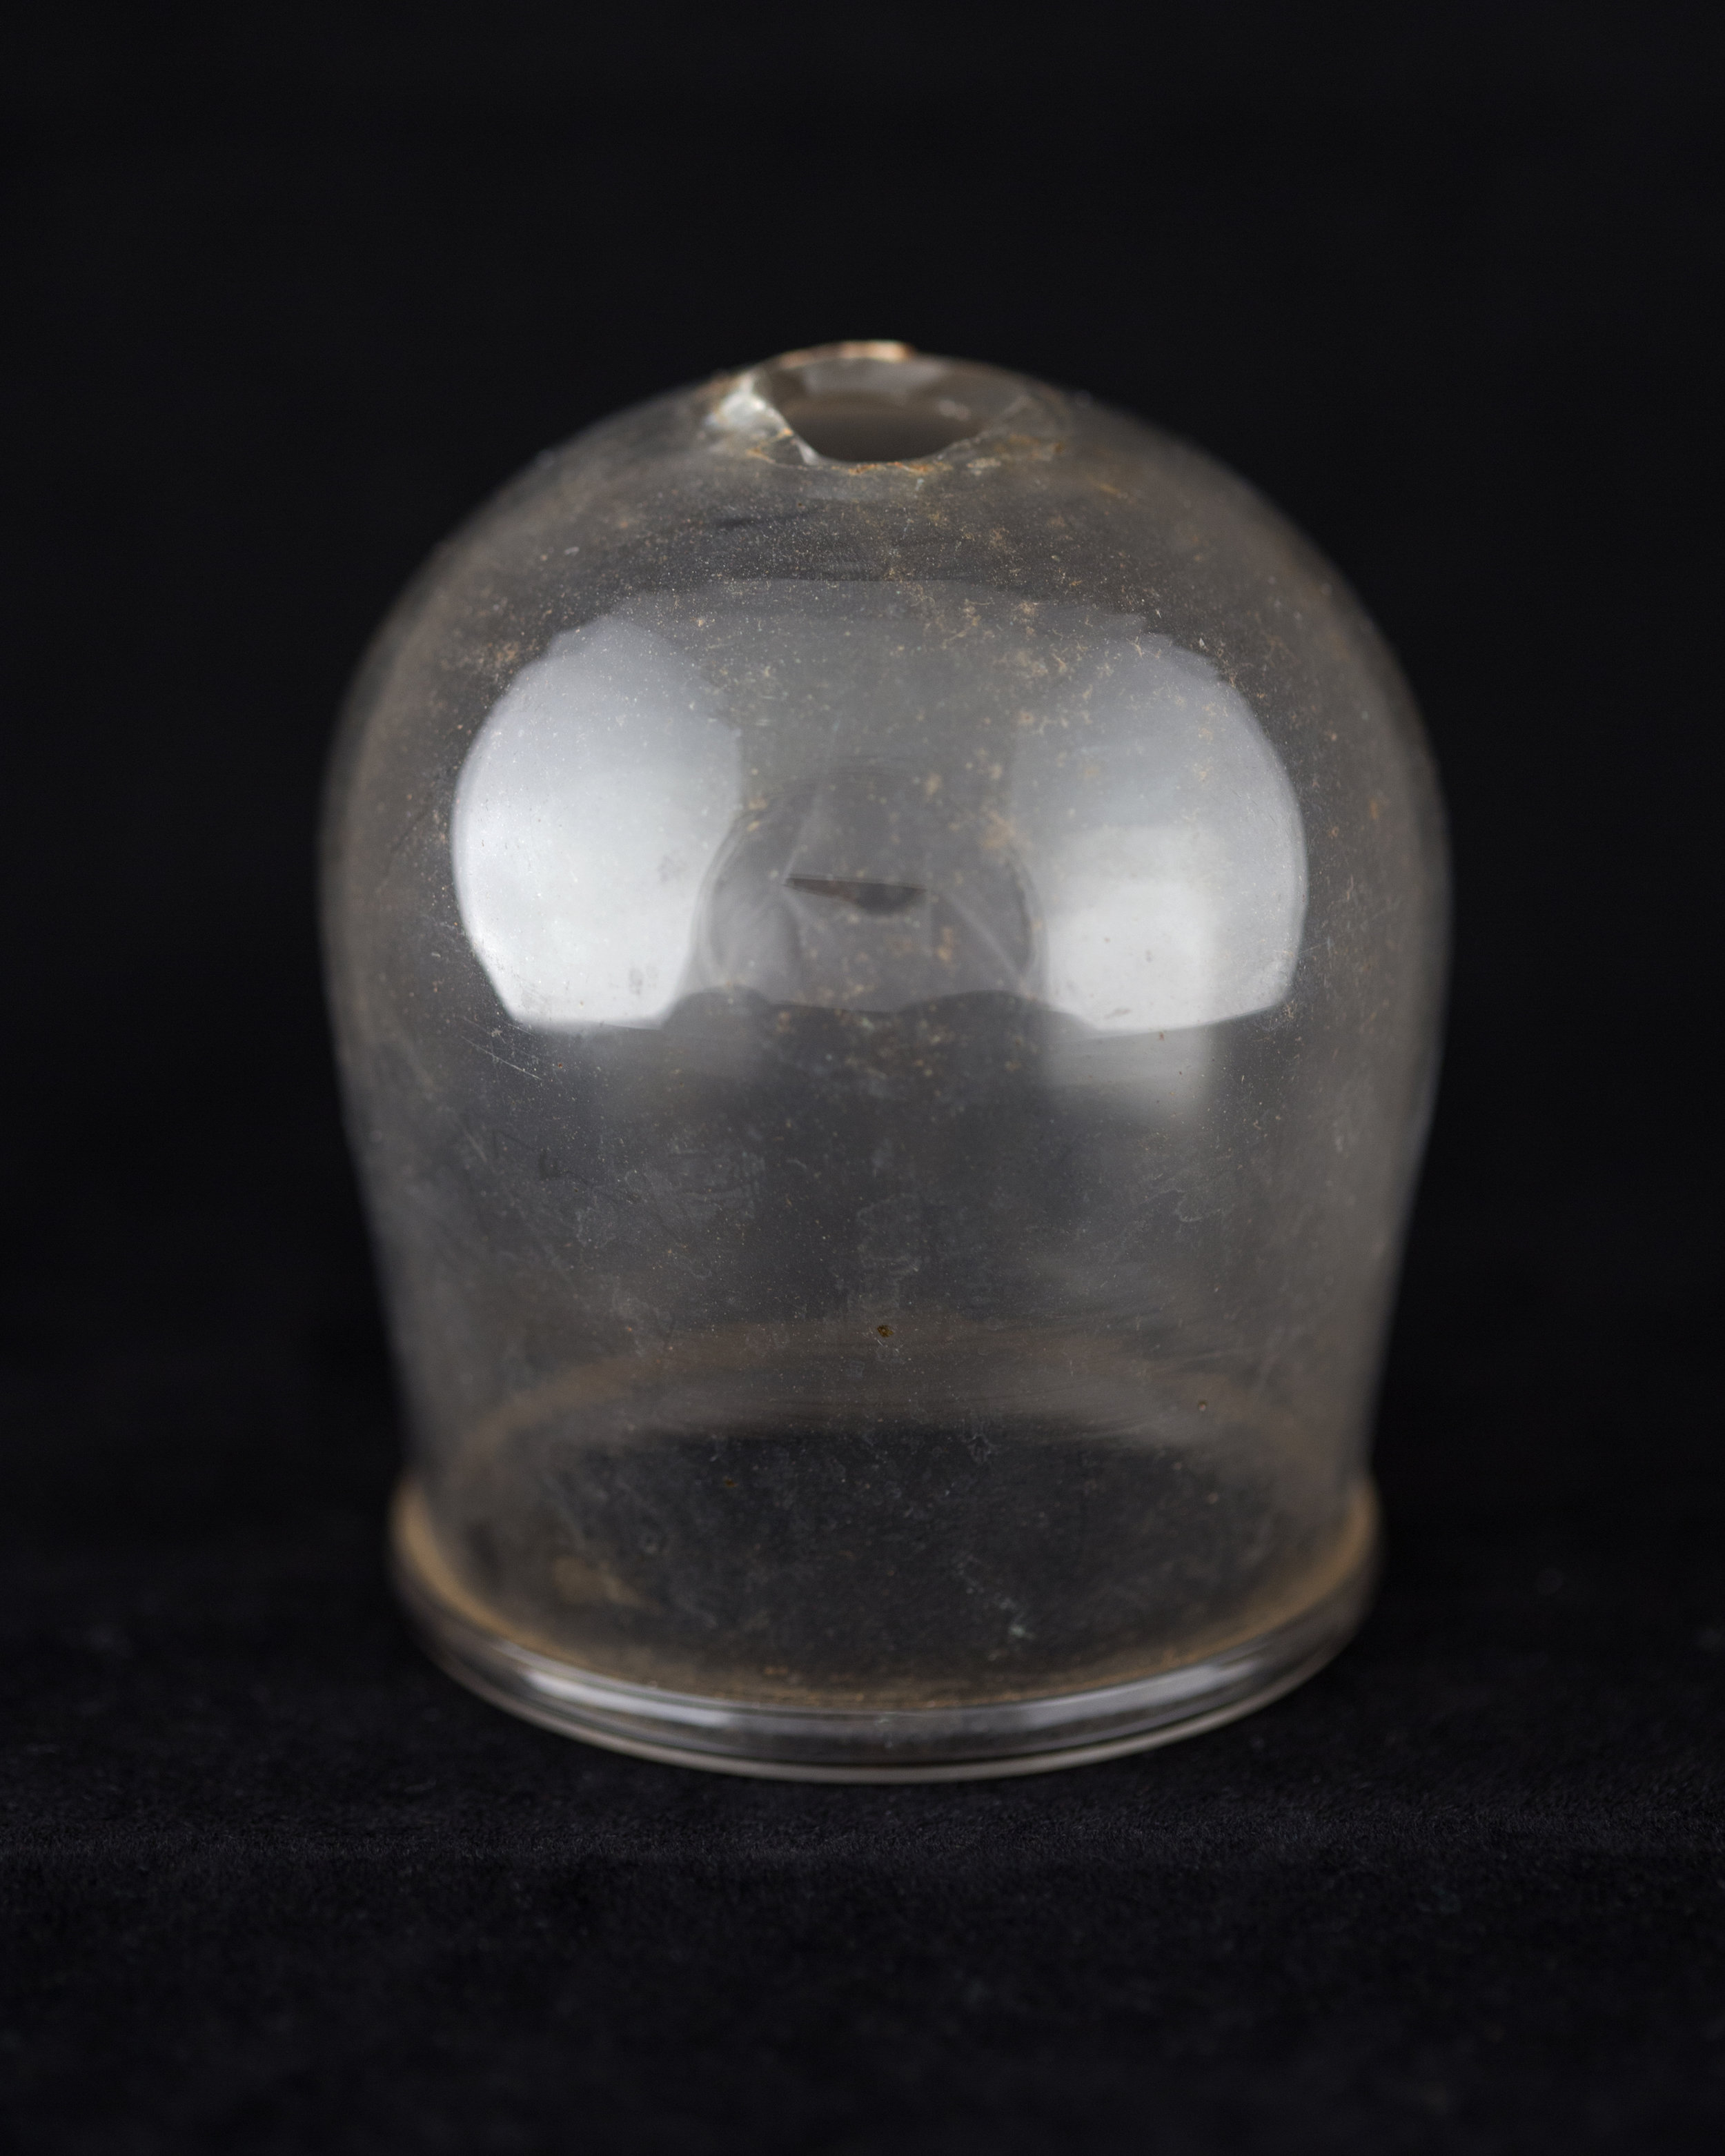 Cupping Device I